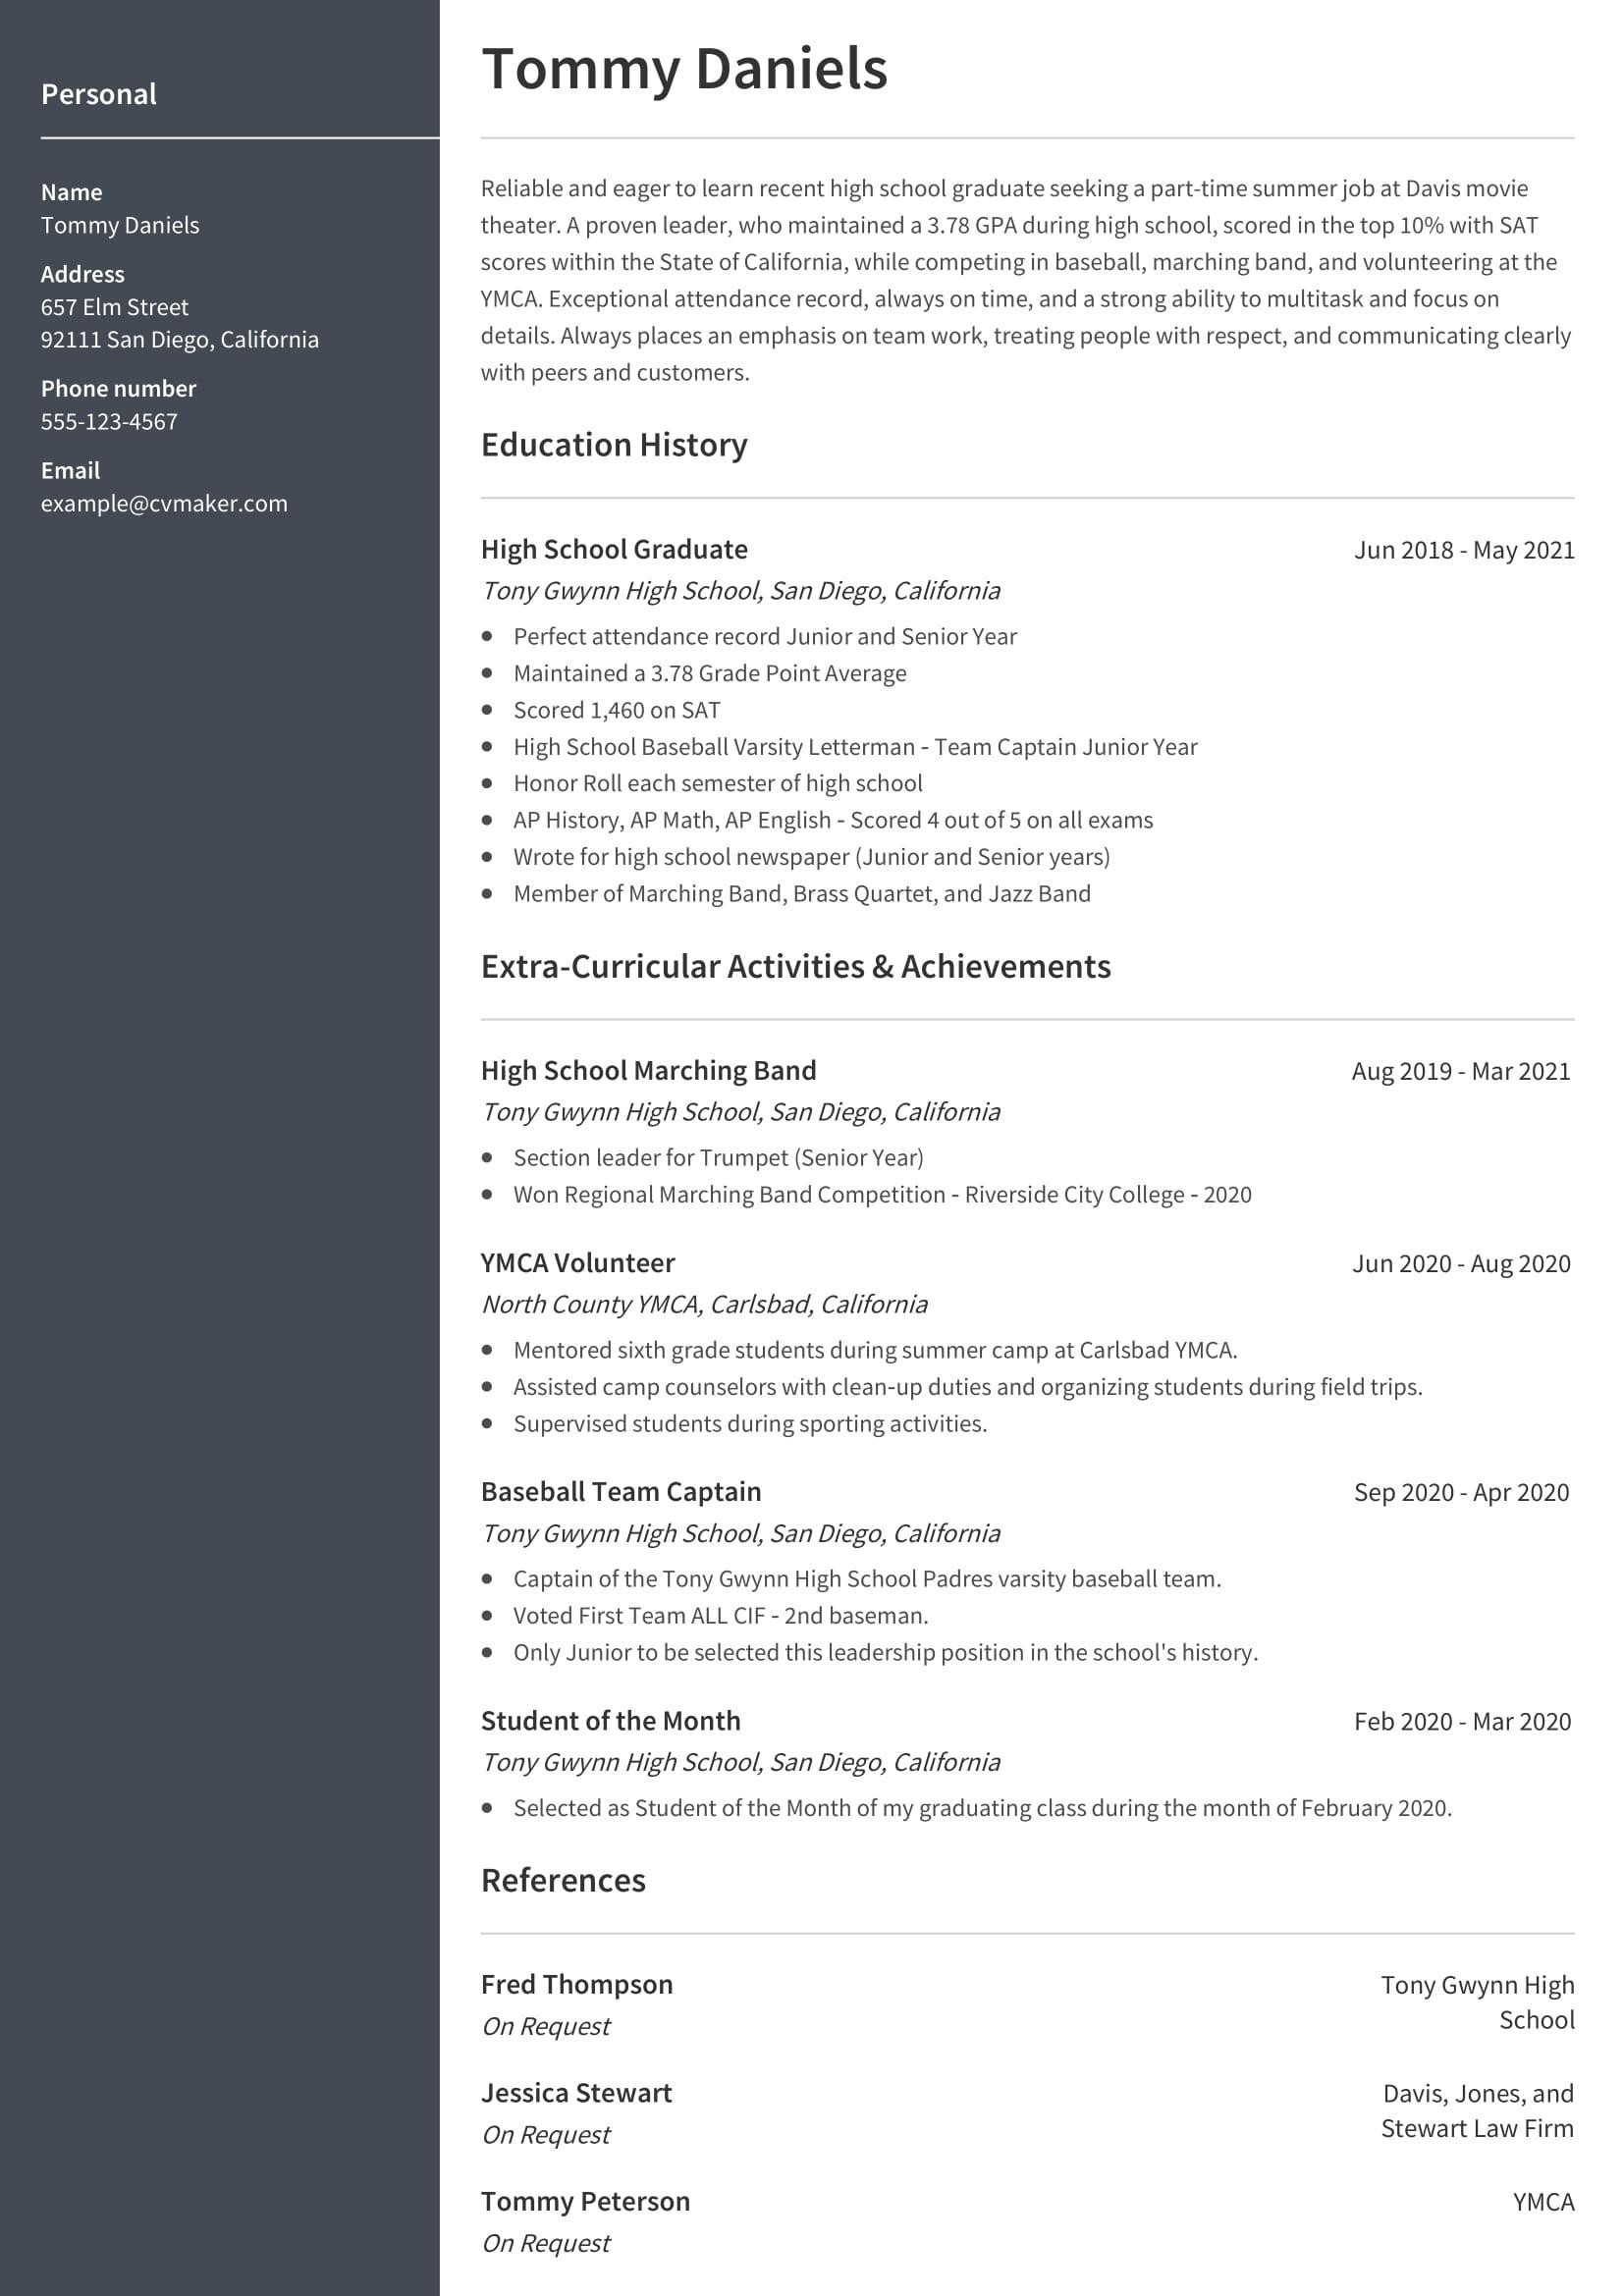 Sample Of High School Resume for Admissions to Colleges High School Resume Template, Example & How to Write Guide 2021 …